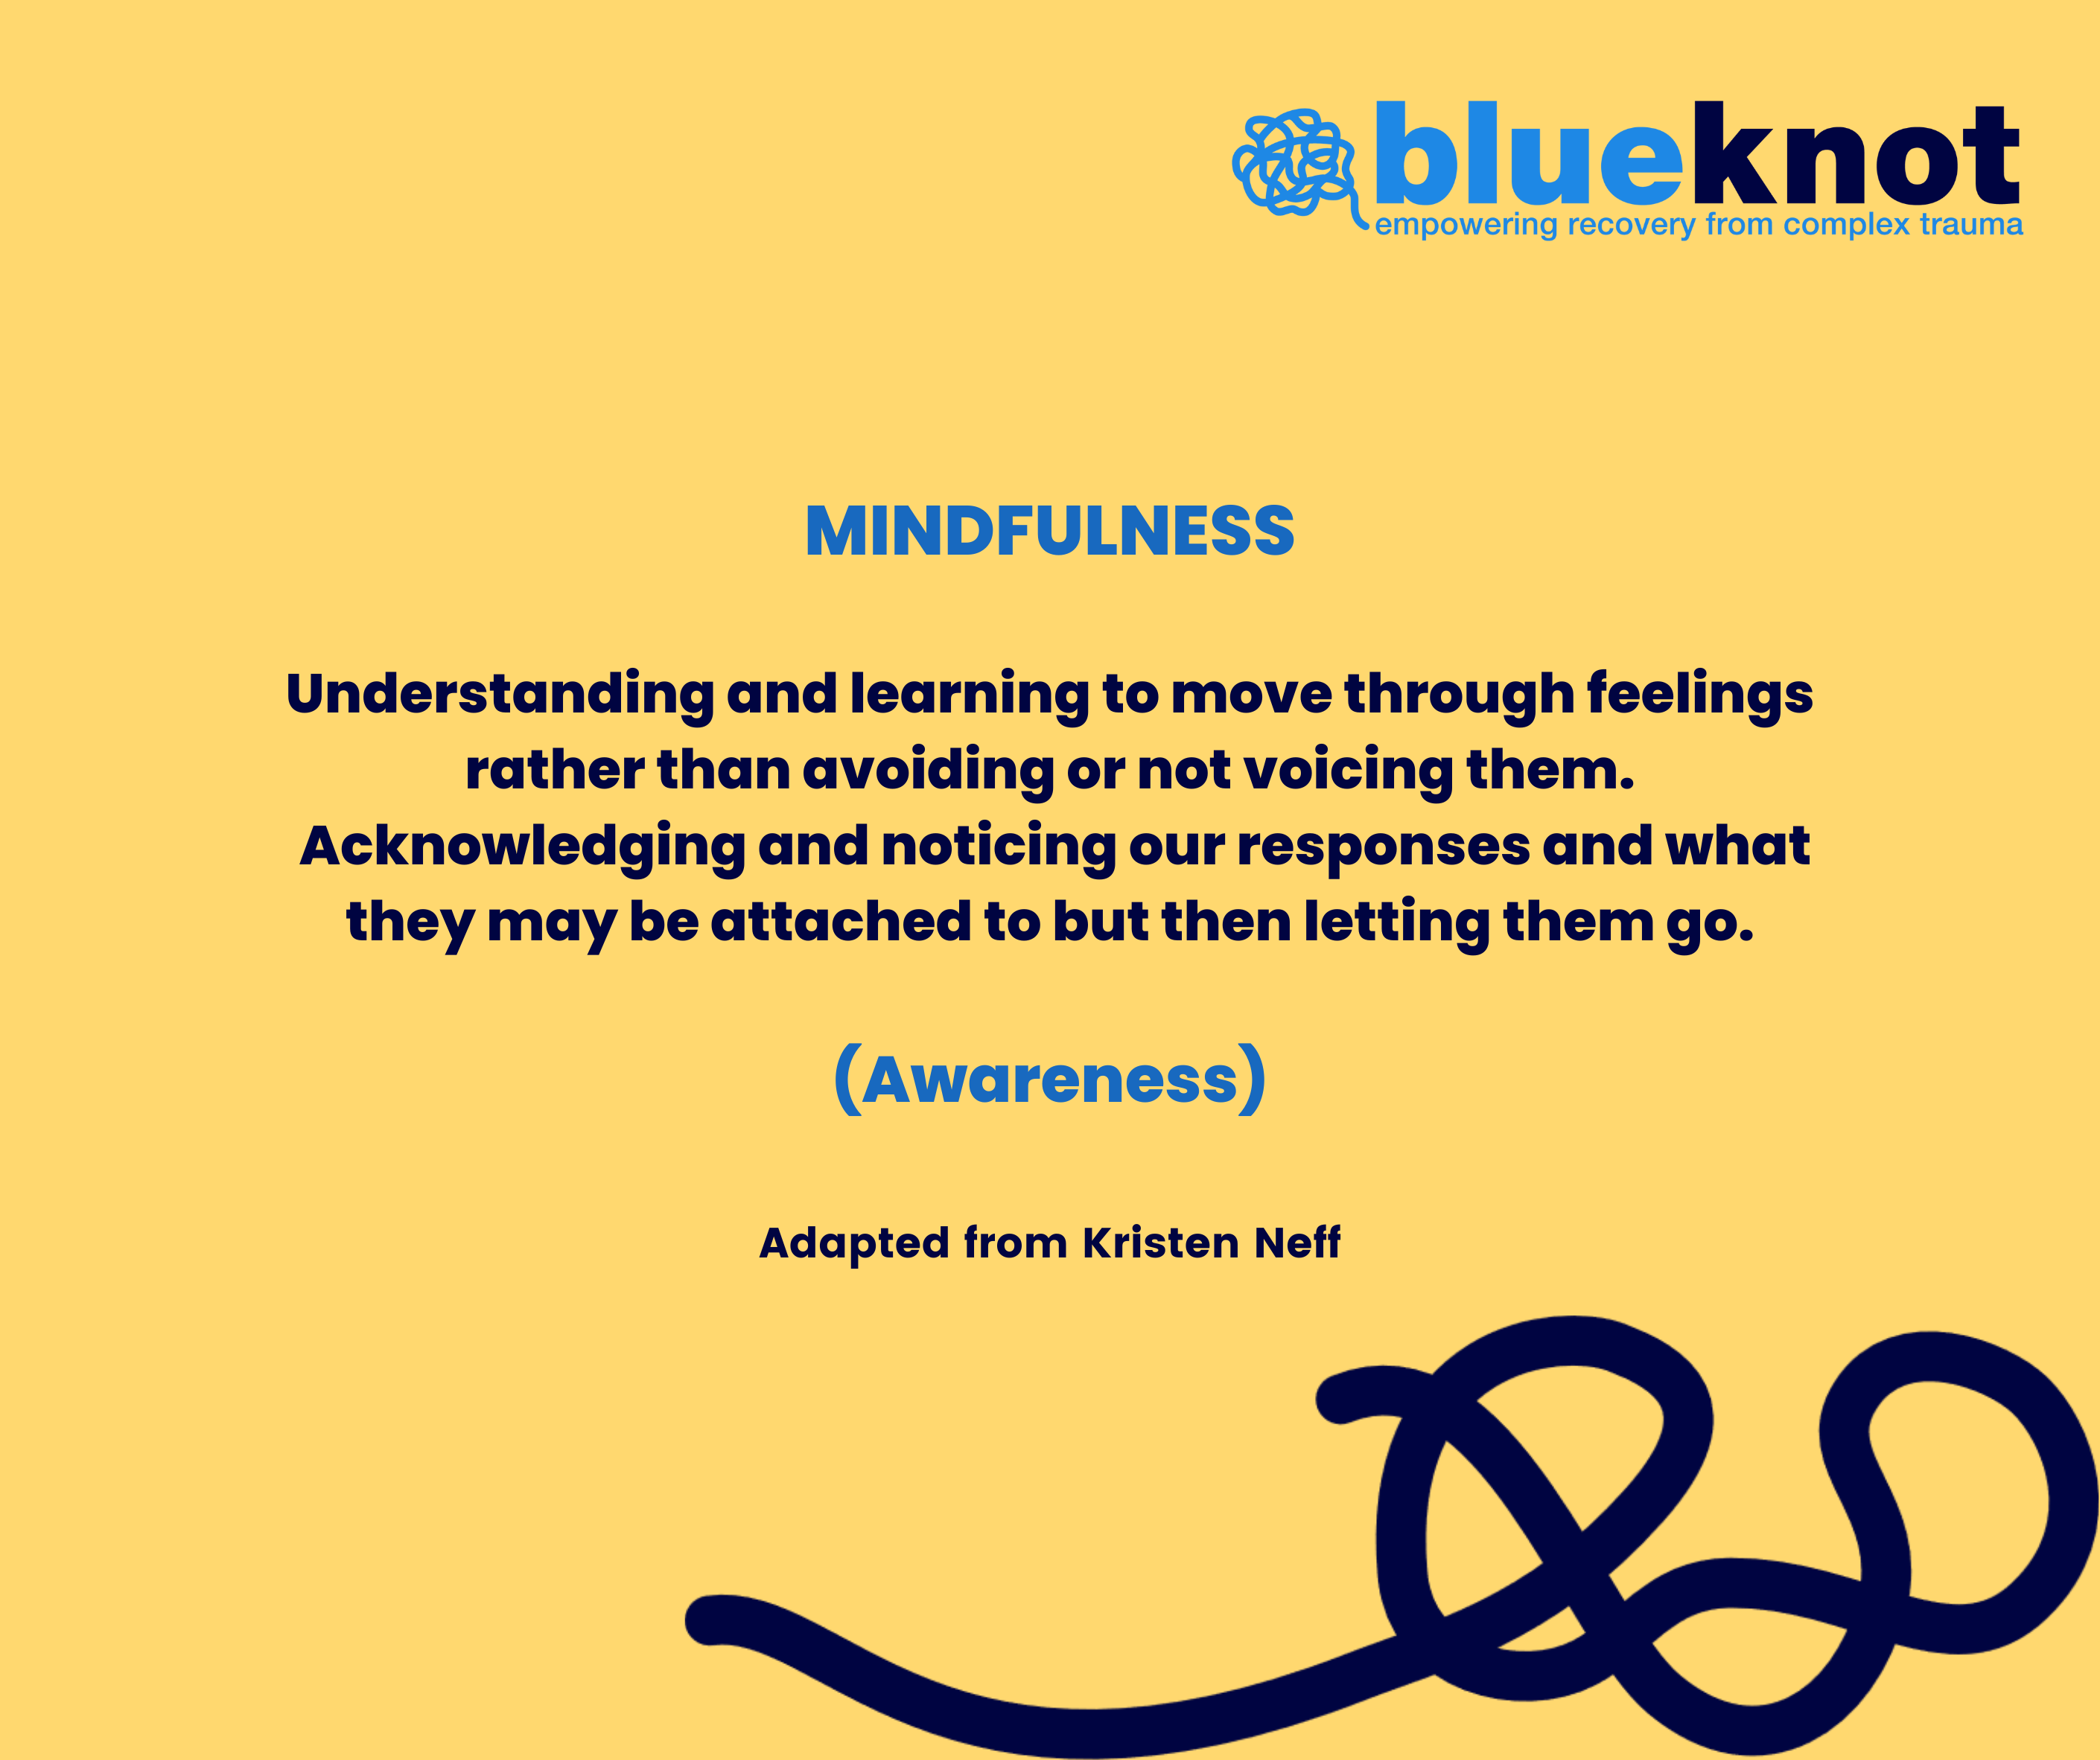 Mindfulness Understanding and learning to move through feelings rather than avoiding or not voicing them. Acknowledging and noticing our responses and what they may be attached to but then letting them go.